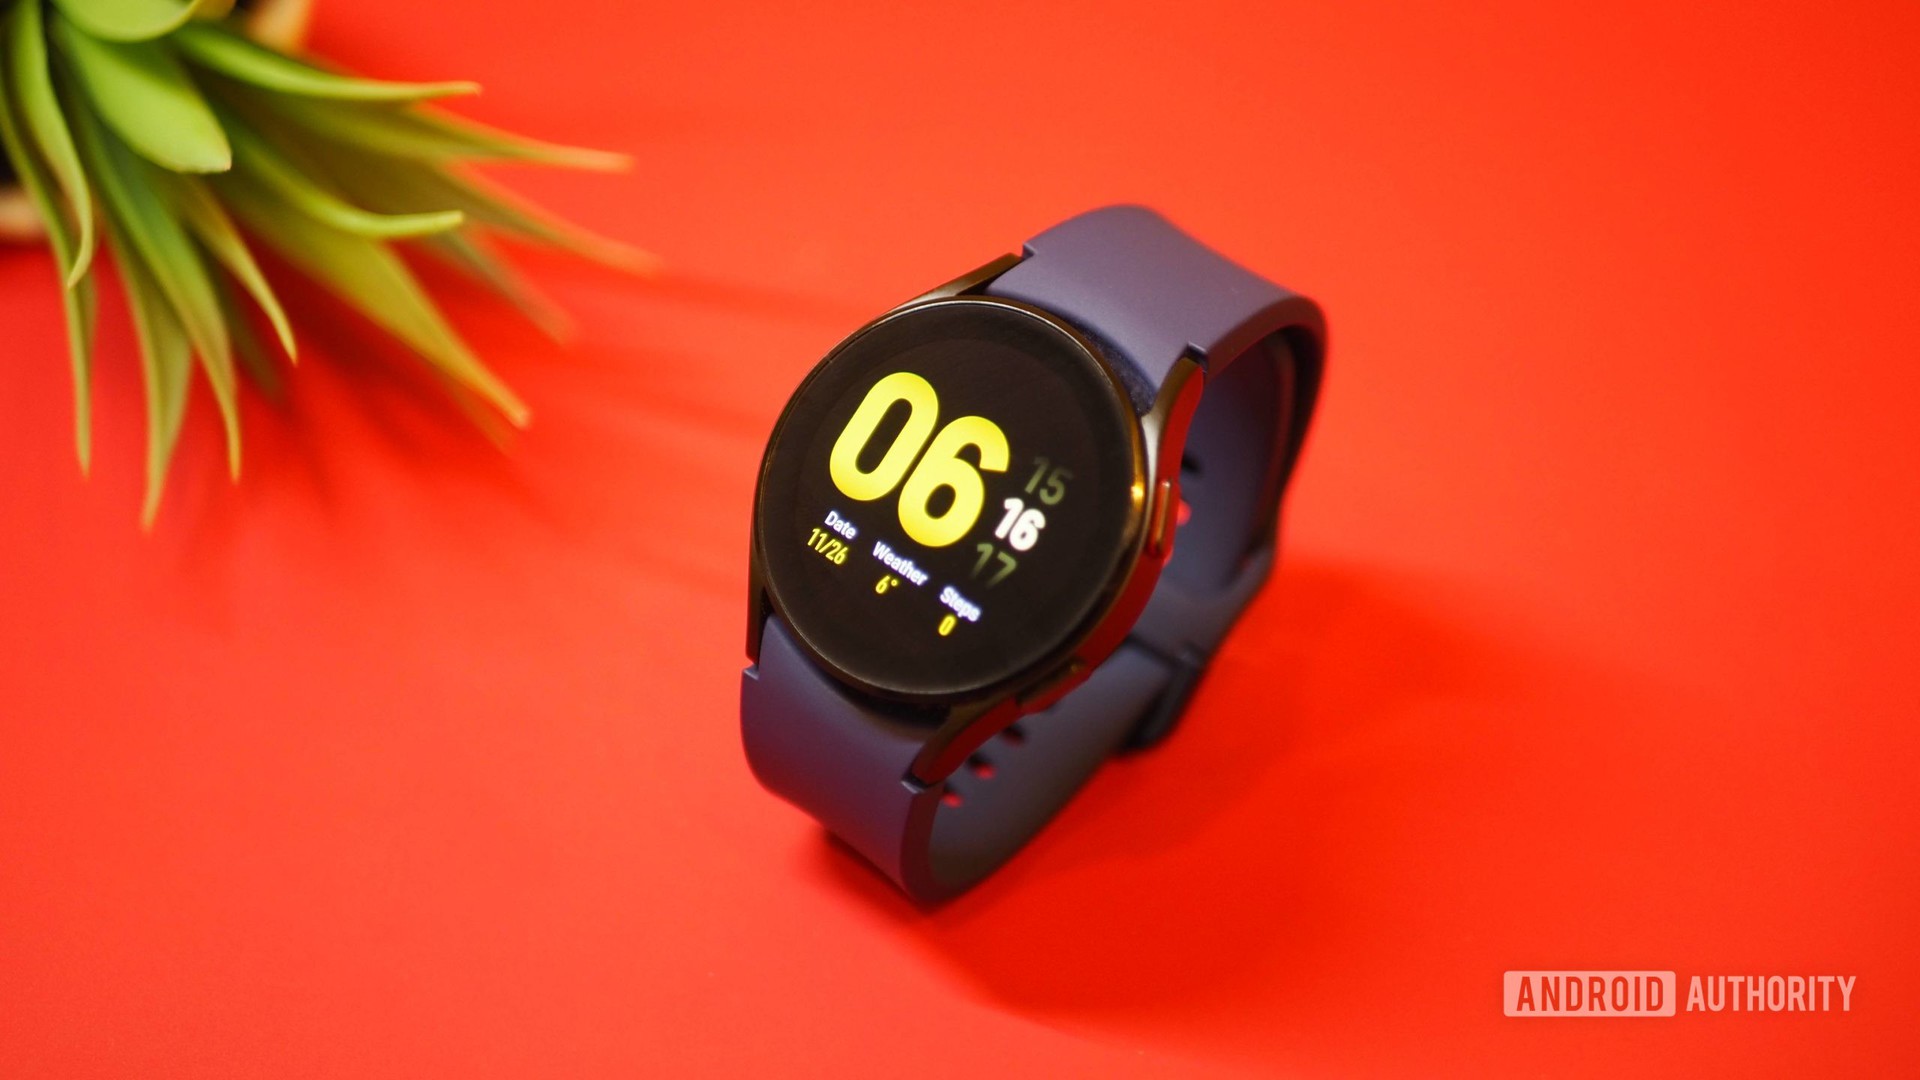 Samsung Galaxy Watch 4 on red background, showing homescreen clock